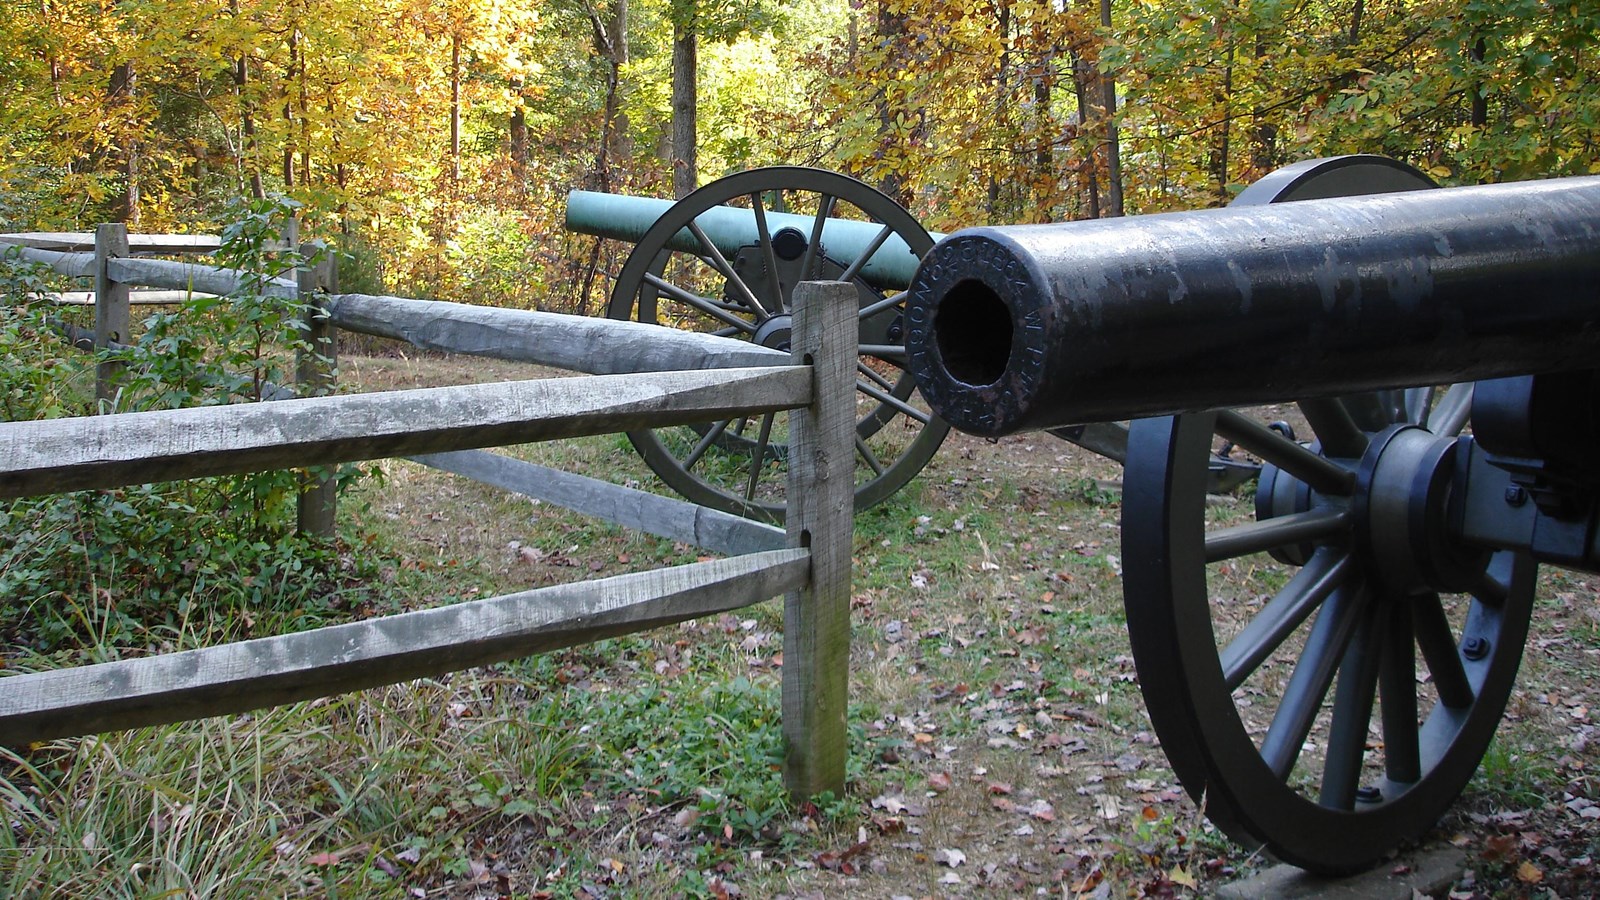 A cannon in front of a wood fence pointed to a field.